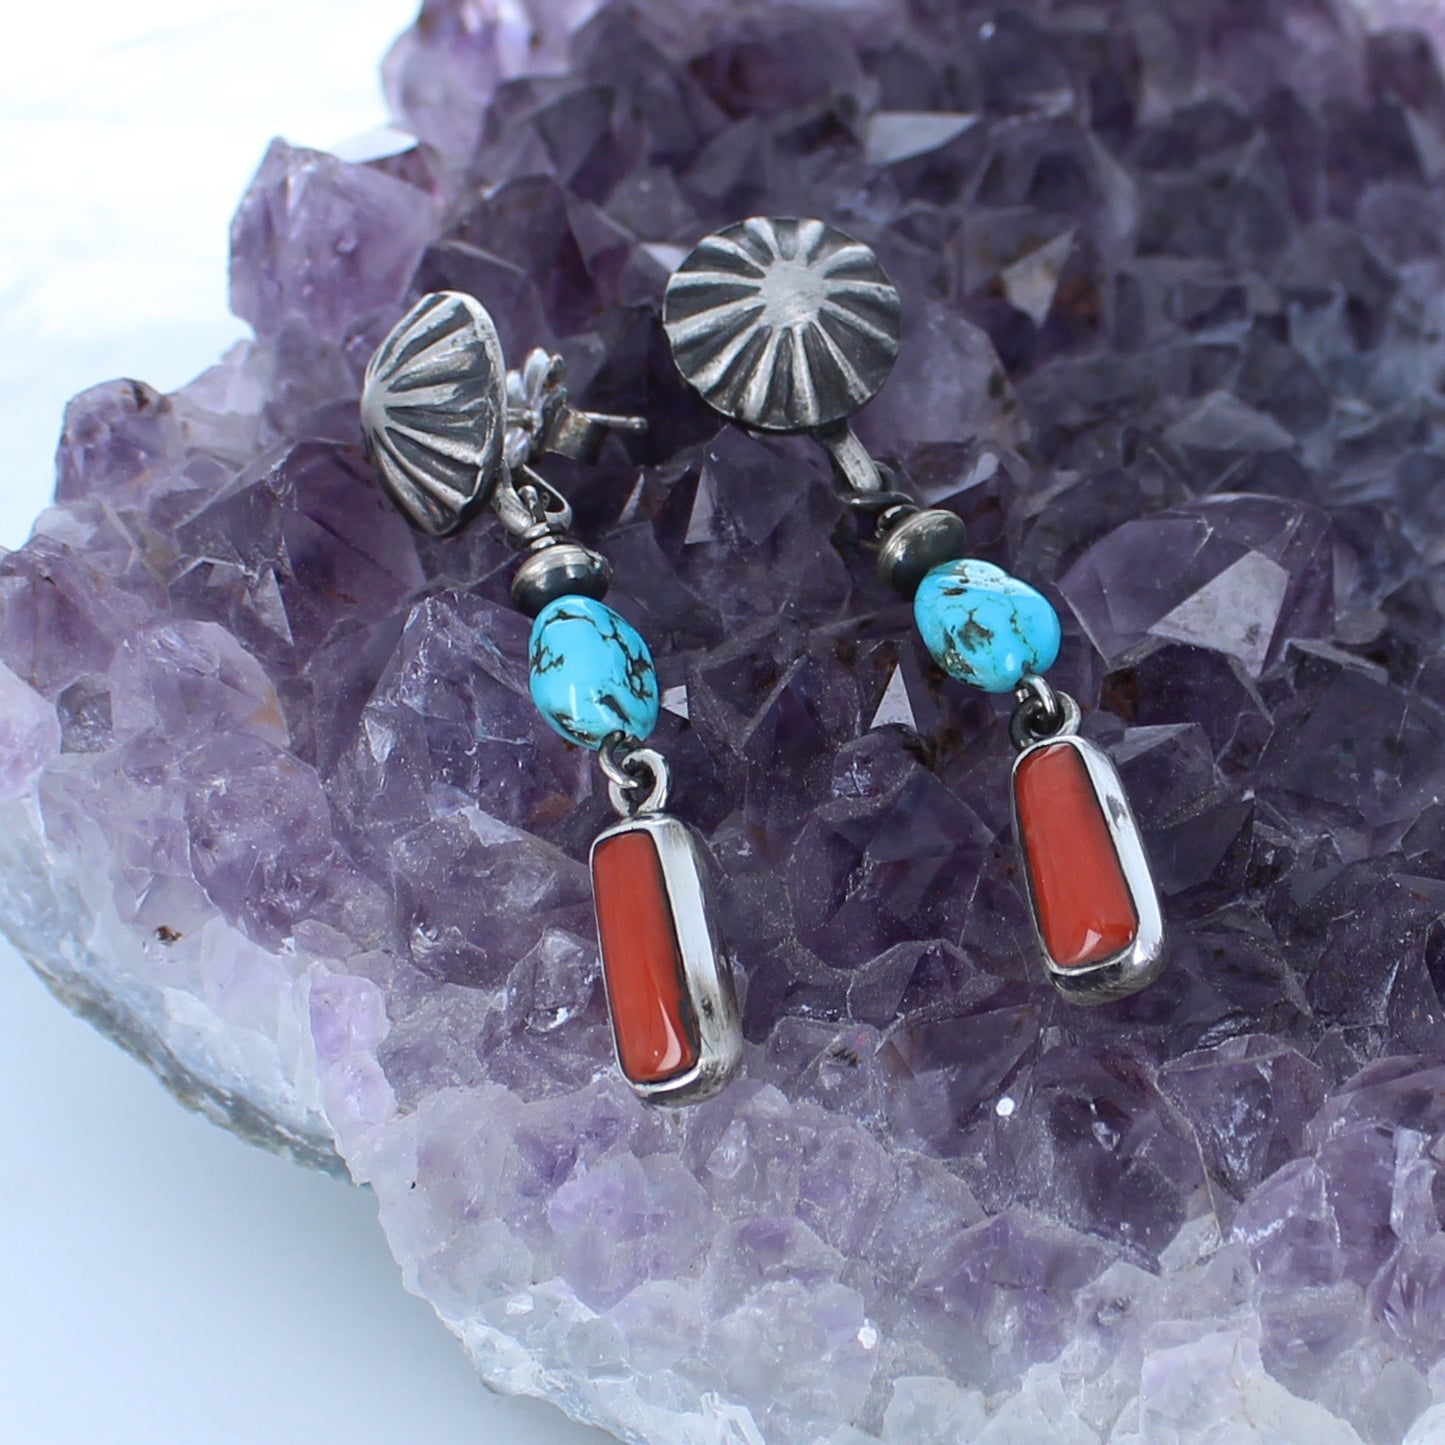 CORAL and TURQUOISE EARRINGS Frieda Kahlo Inspired Handmade